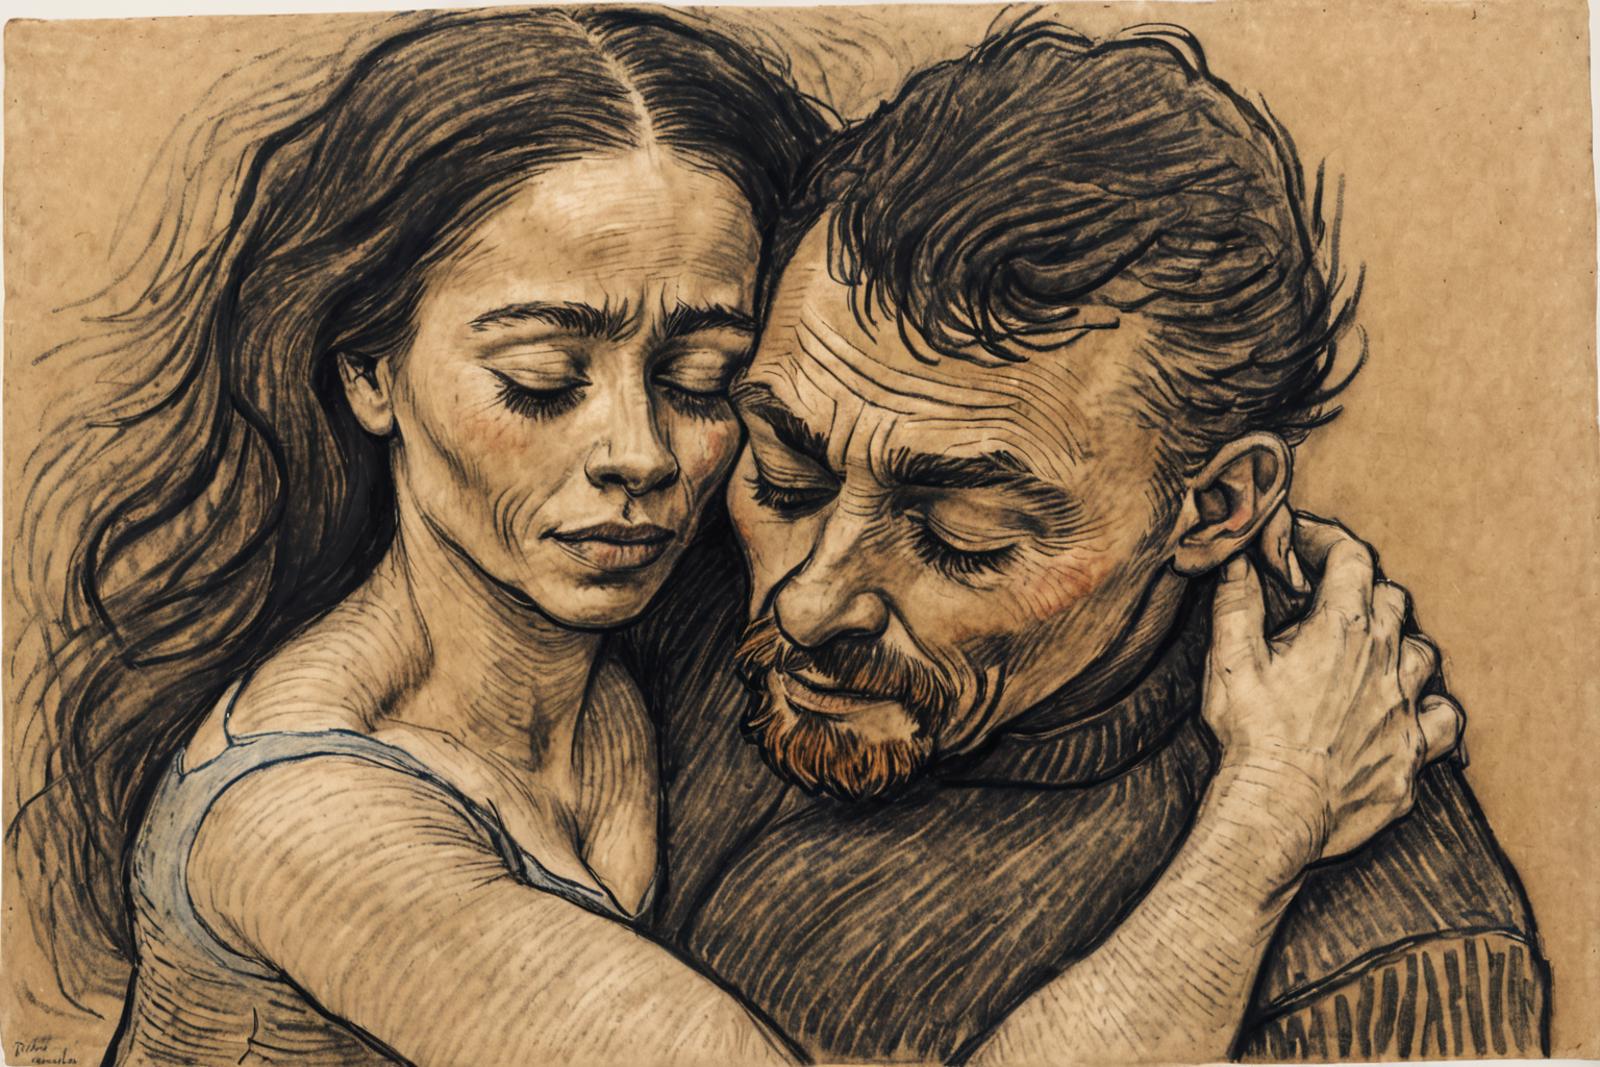 A drawing of a man and a woman hugging each other.